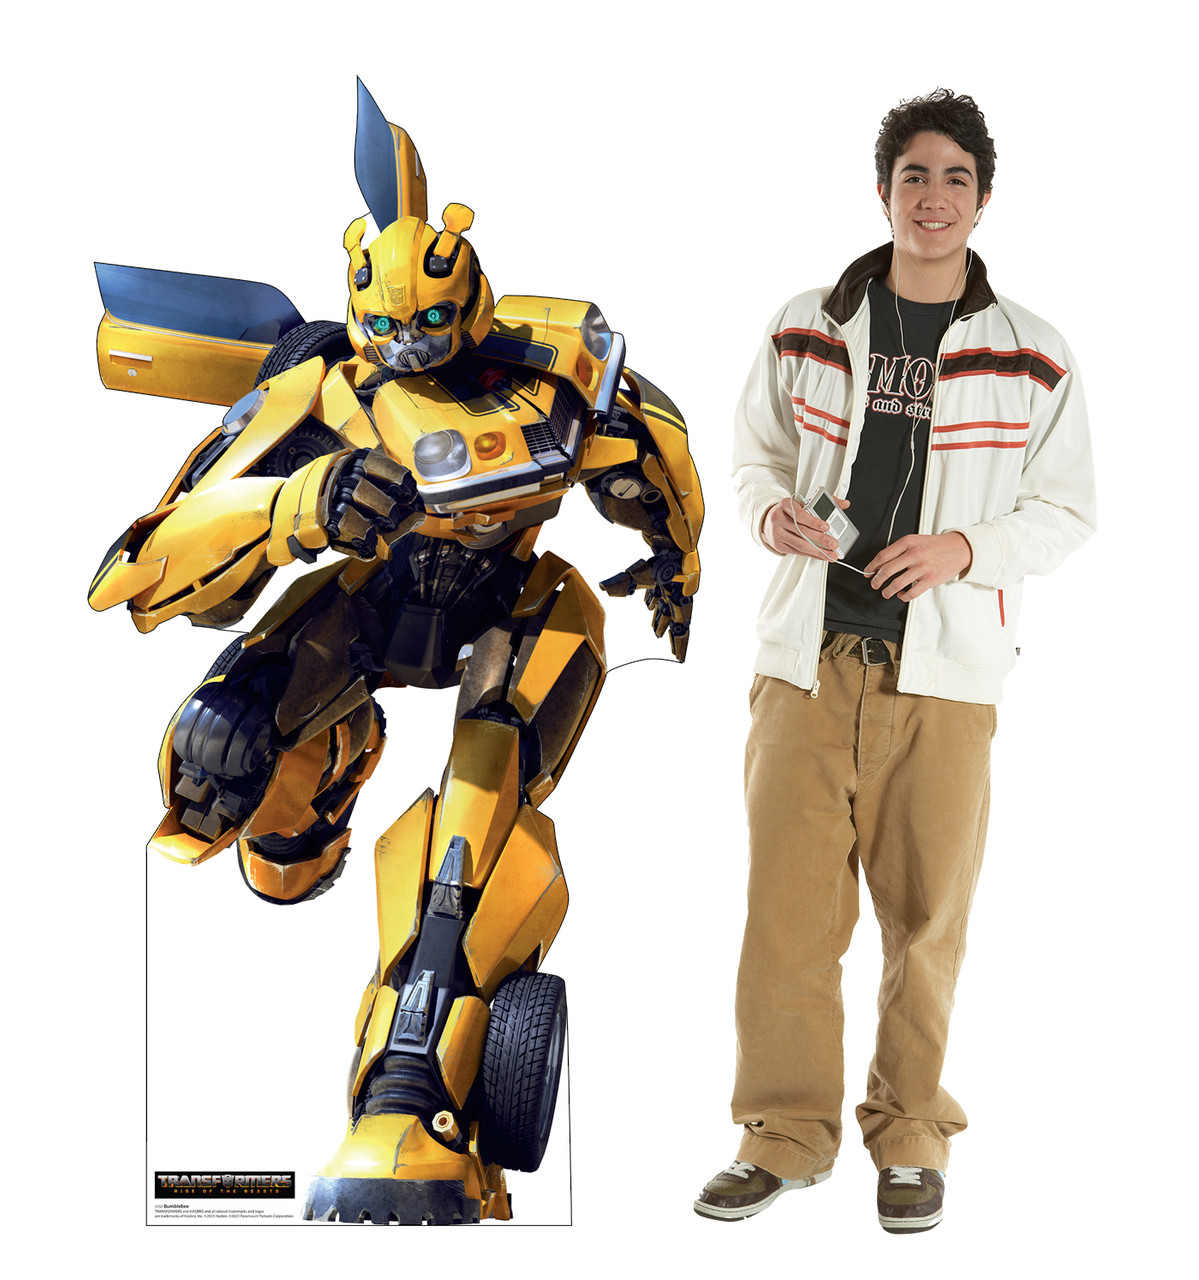 Life-size cardboard standee of Bumblebee with model.